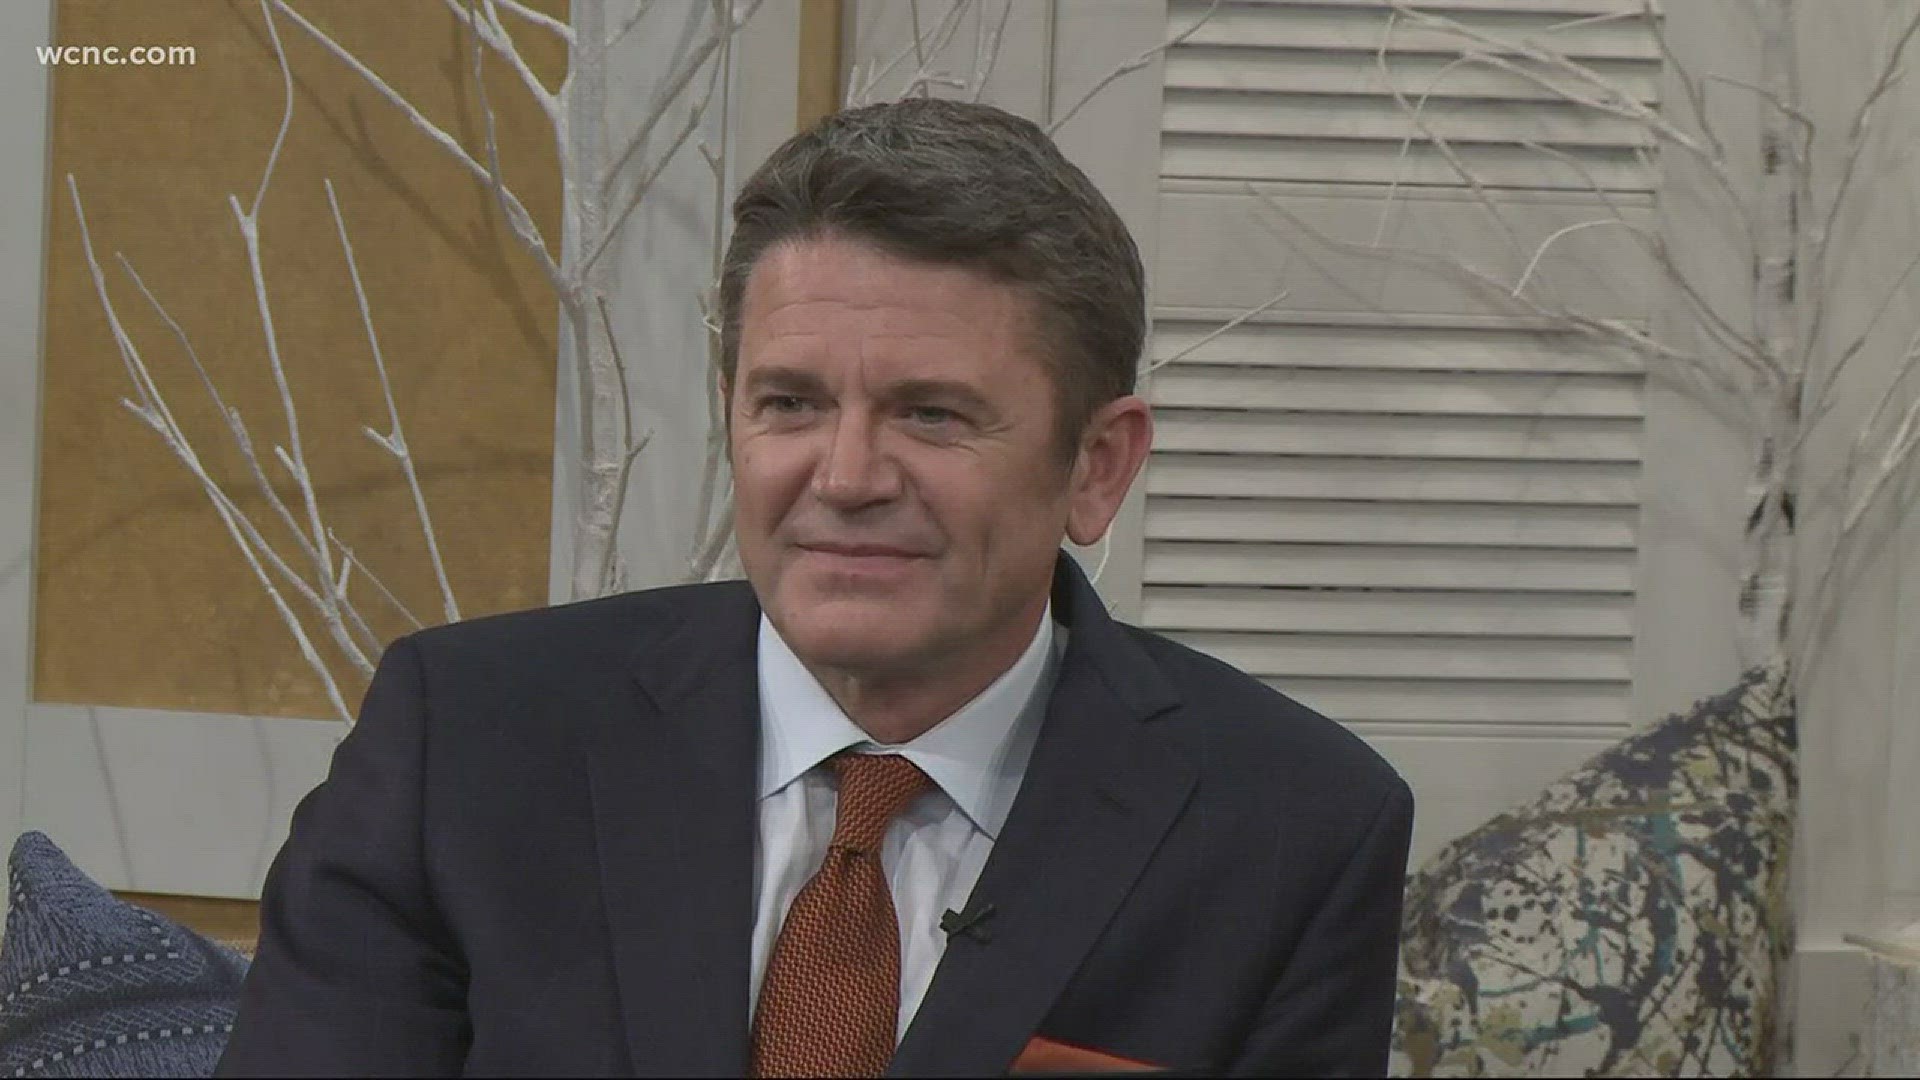 Actor John Michael Higgins share hilarious stories about his career.